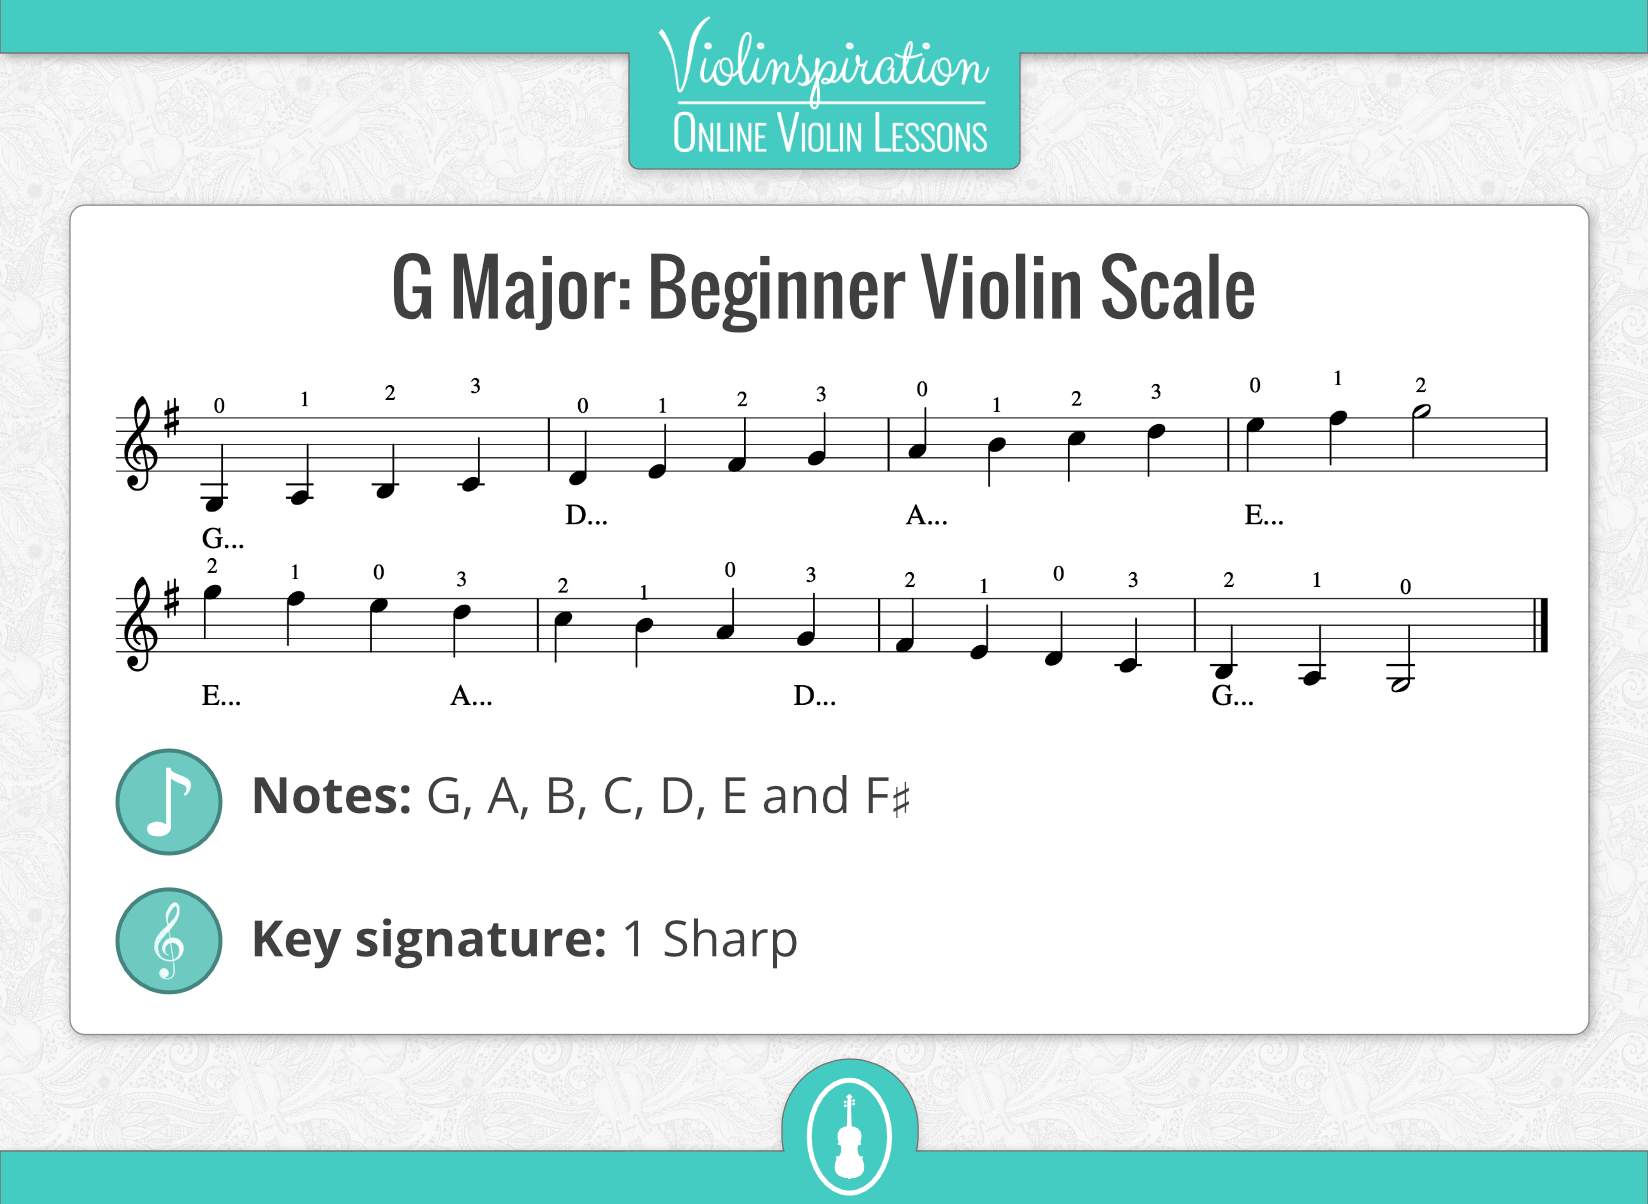 Violin Scales: The 5 Most Commonly Used Violin Violinspiration